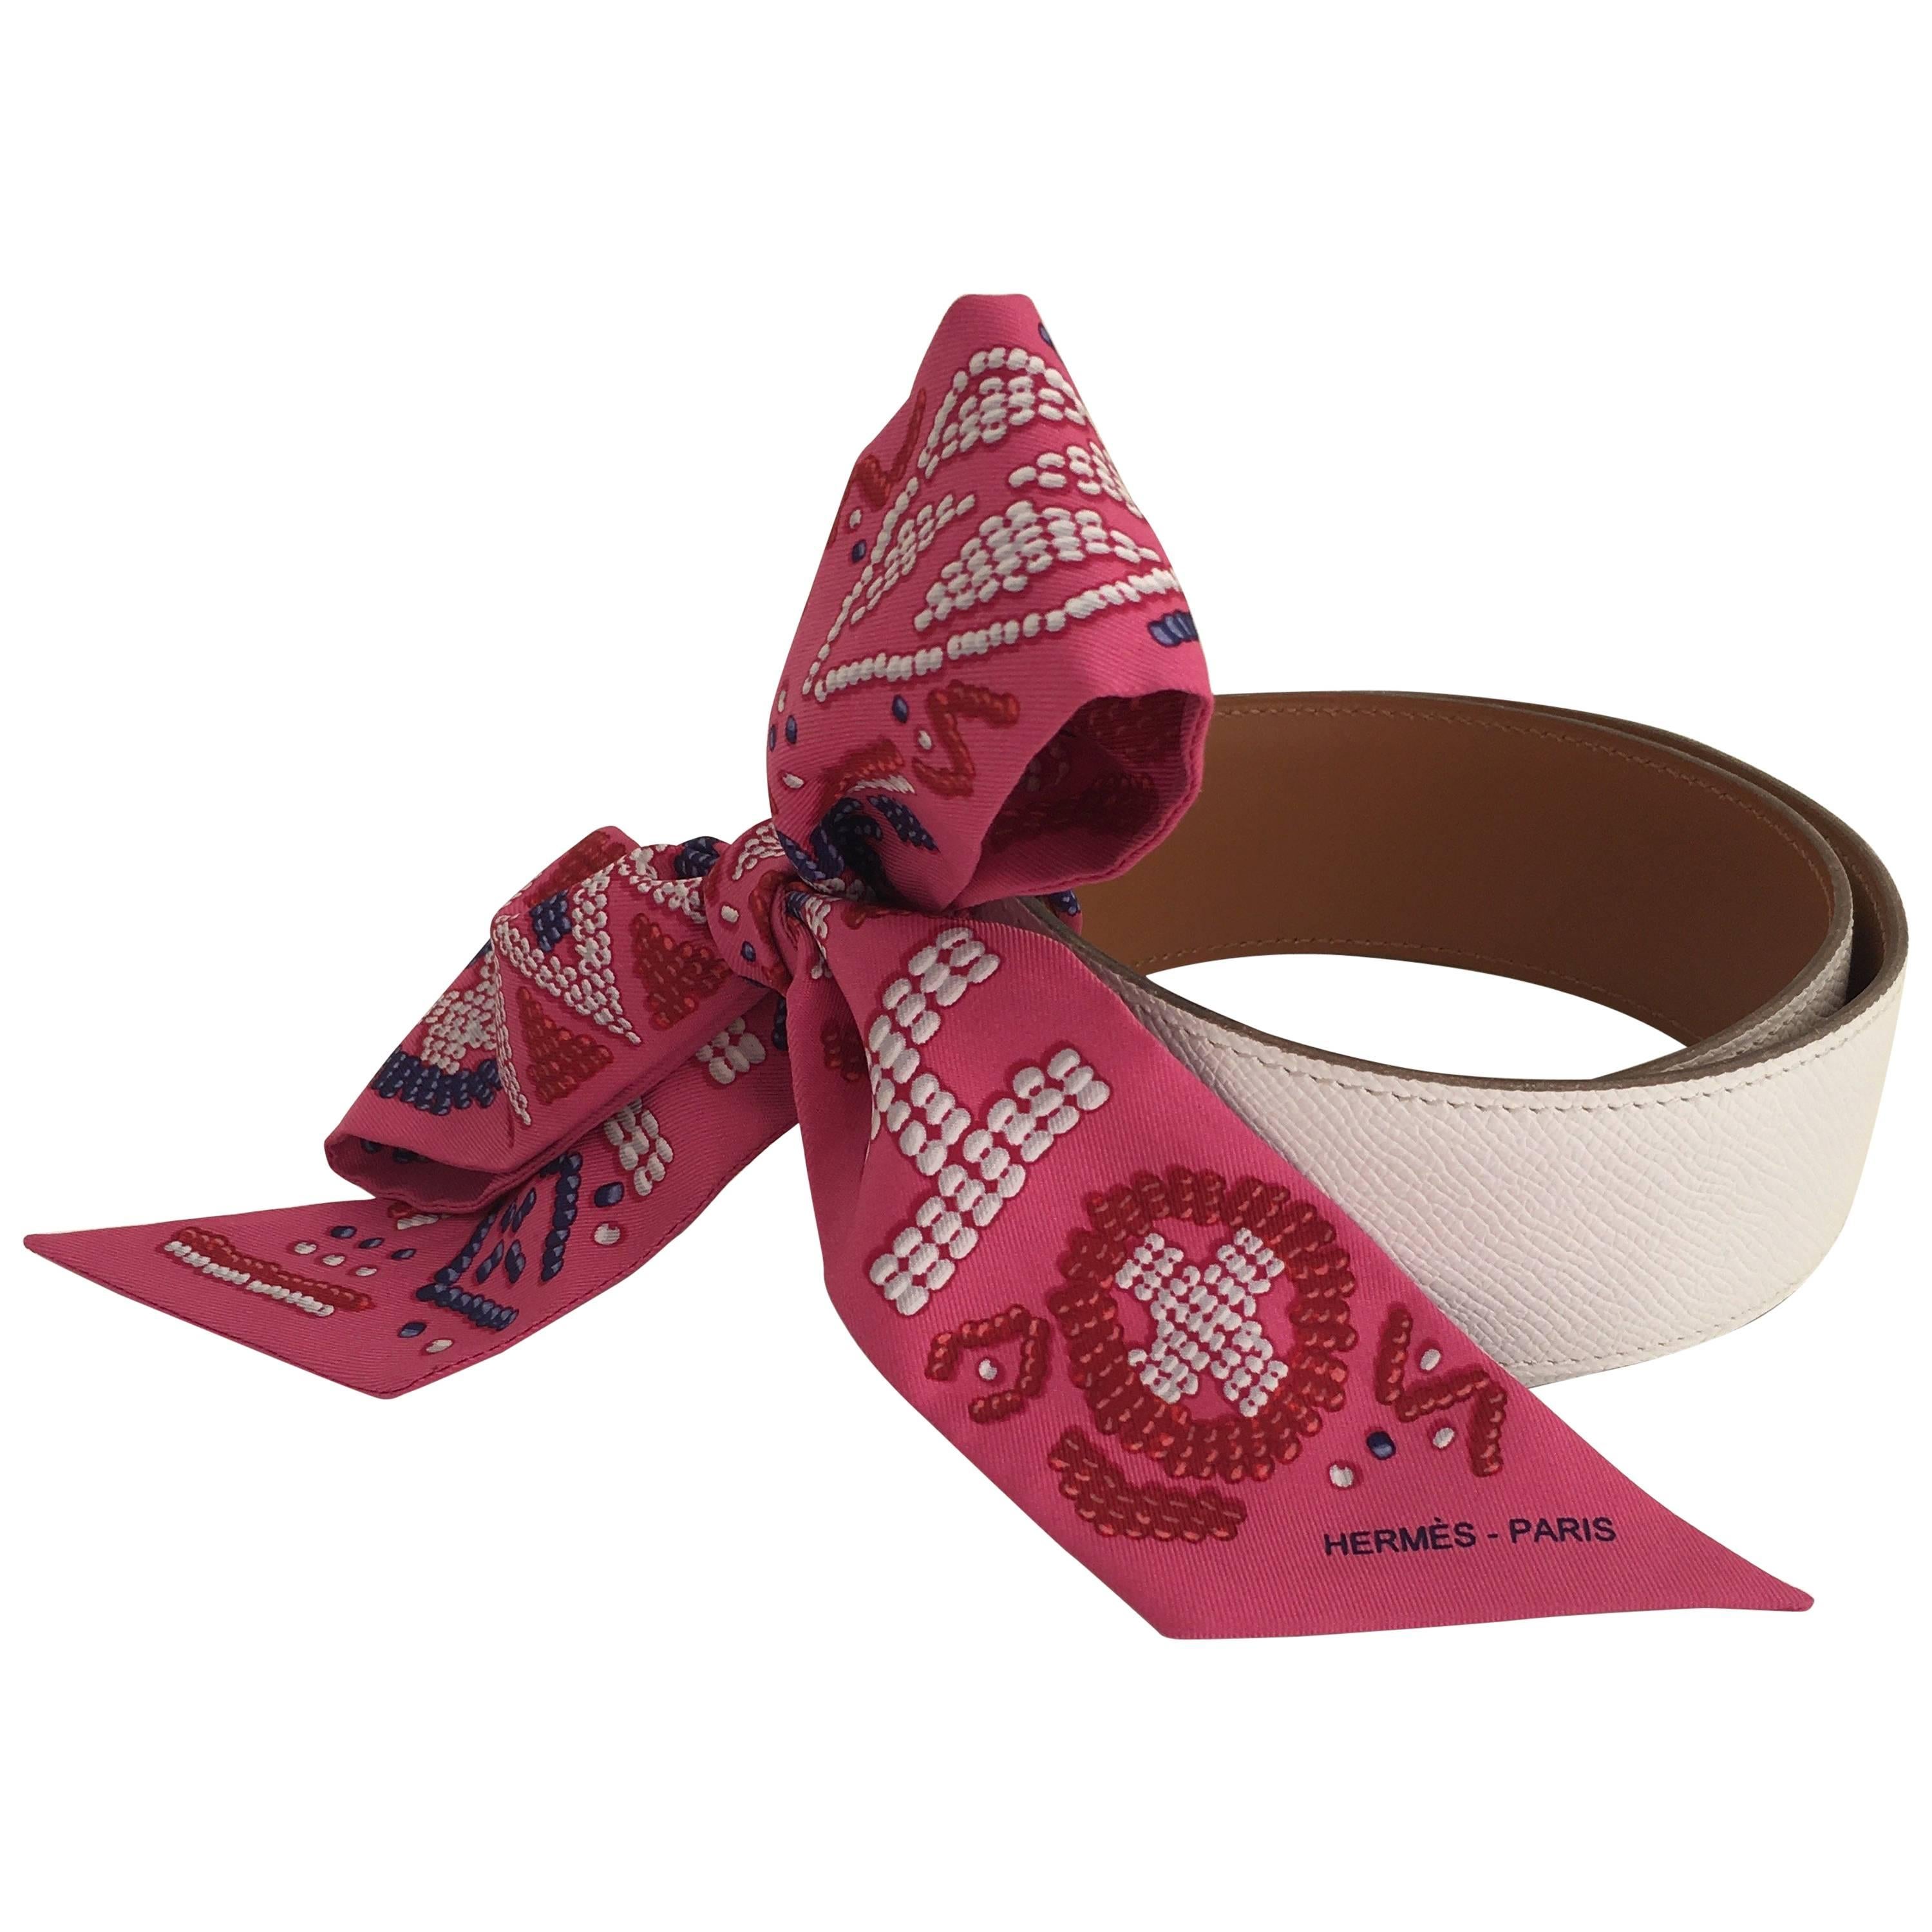 Hermès White Leather Belt with Pink Silk Twilly with White, Red and Blue Design